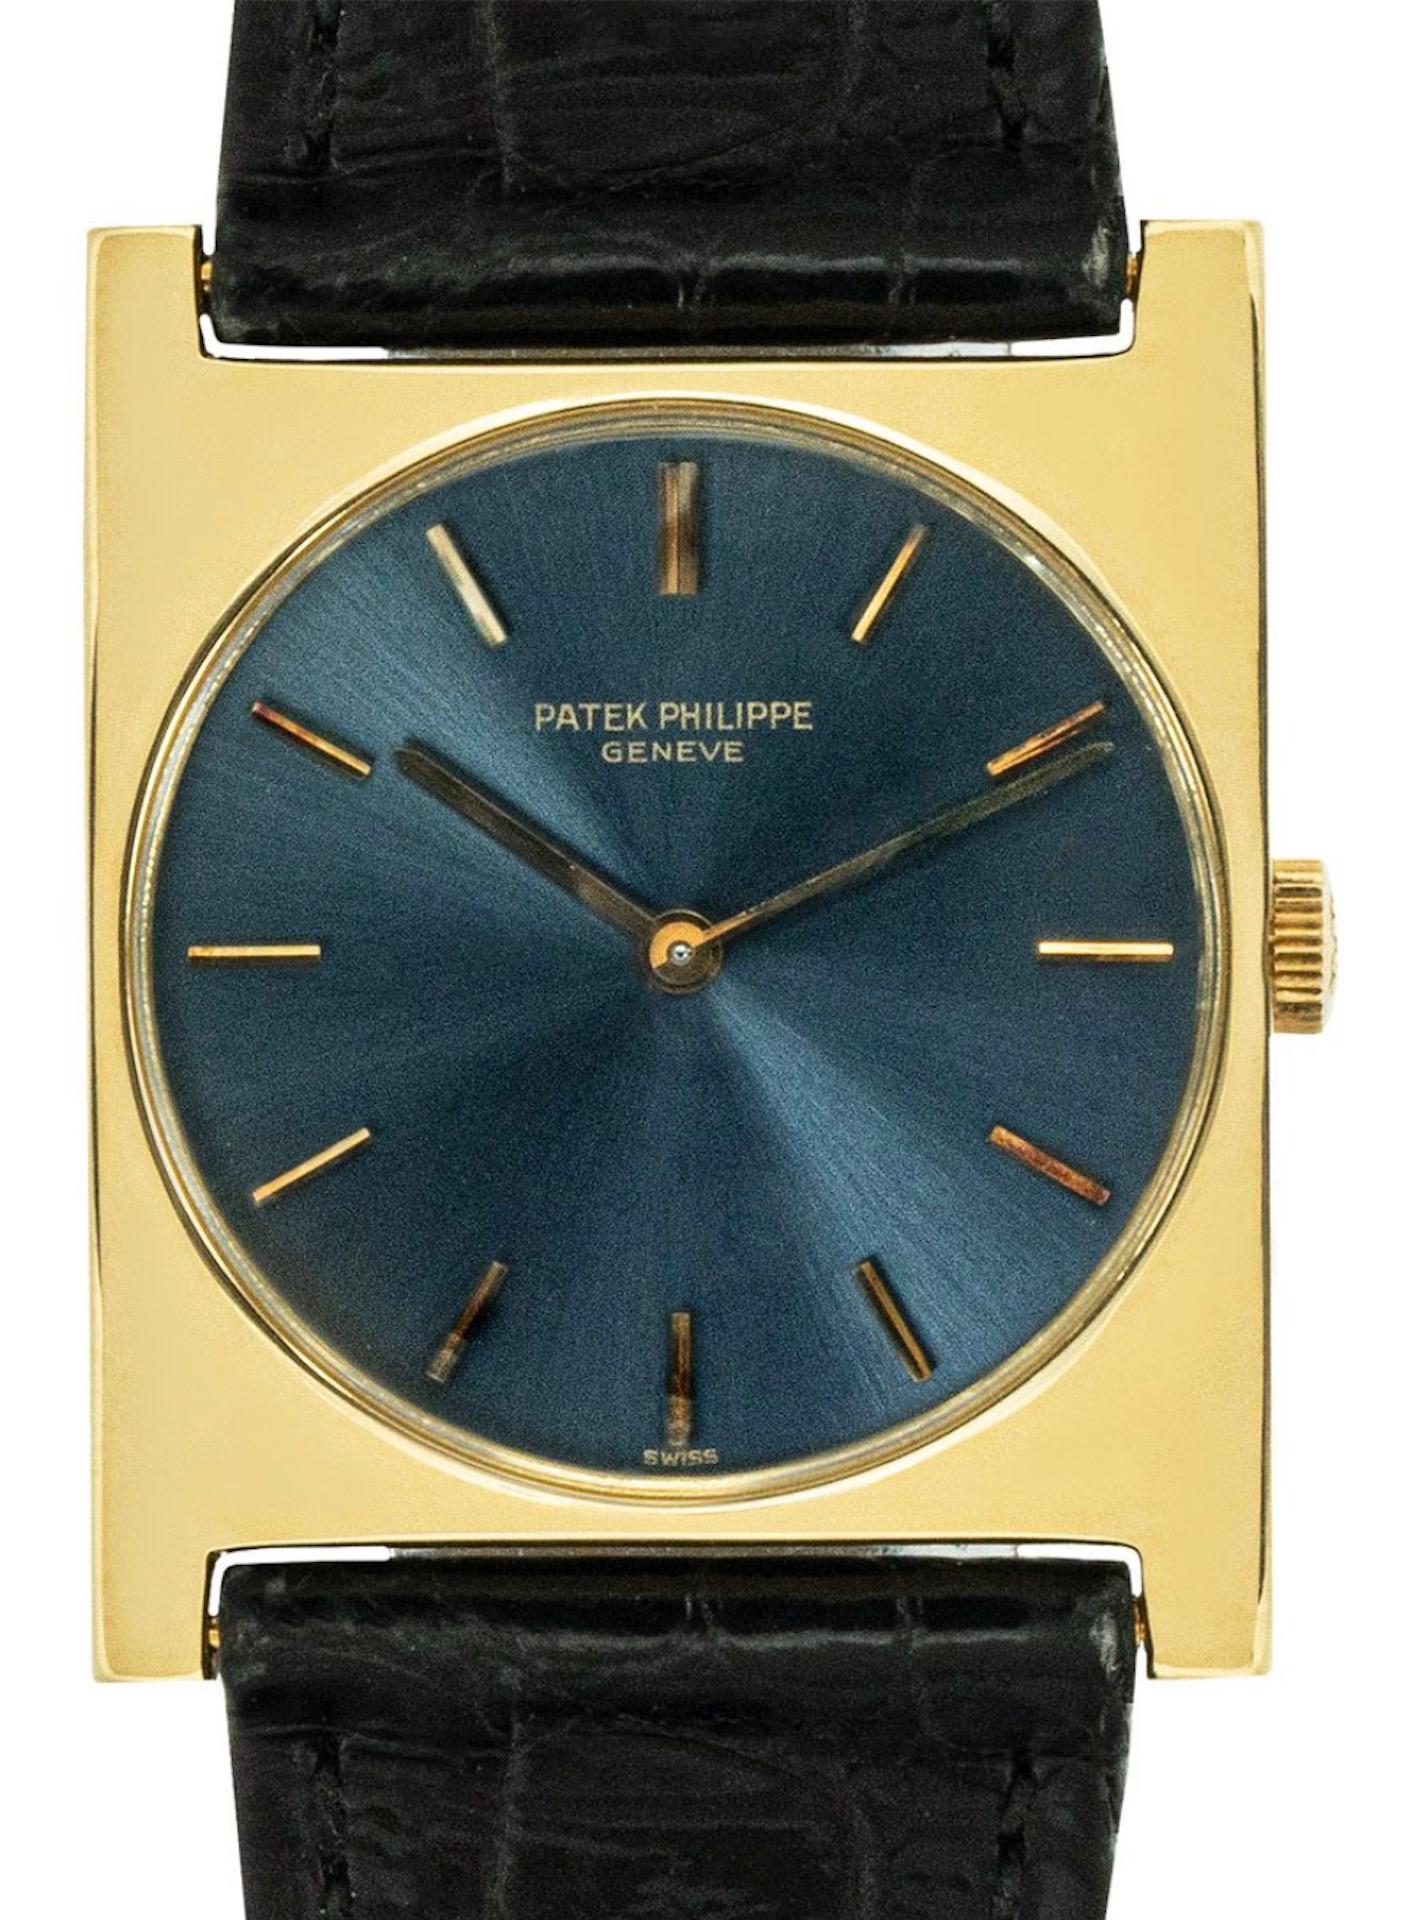 A 28mm yellow gold Dress Watch by Patek Philippe. Featuring a distinctive with blue dial applied hour markers and a yellow gold bezel. Fitted with a sapphire glass, a manual winding movement and an original black leather strap equipped with a yellow